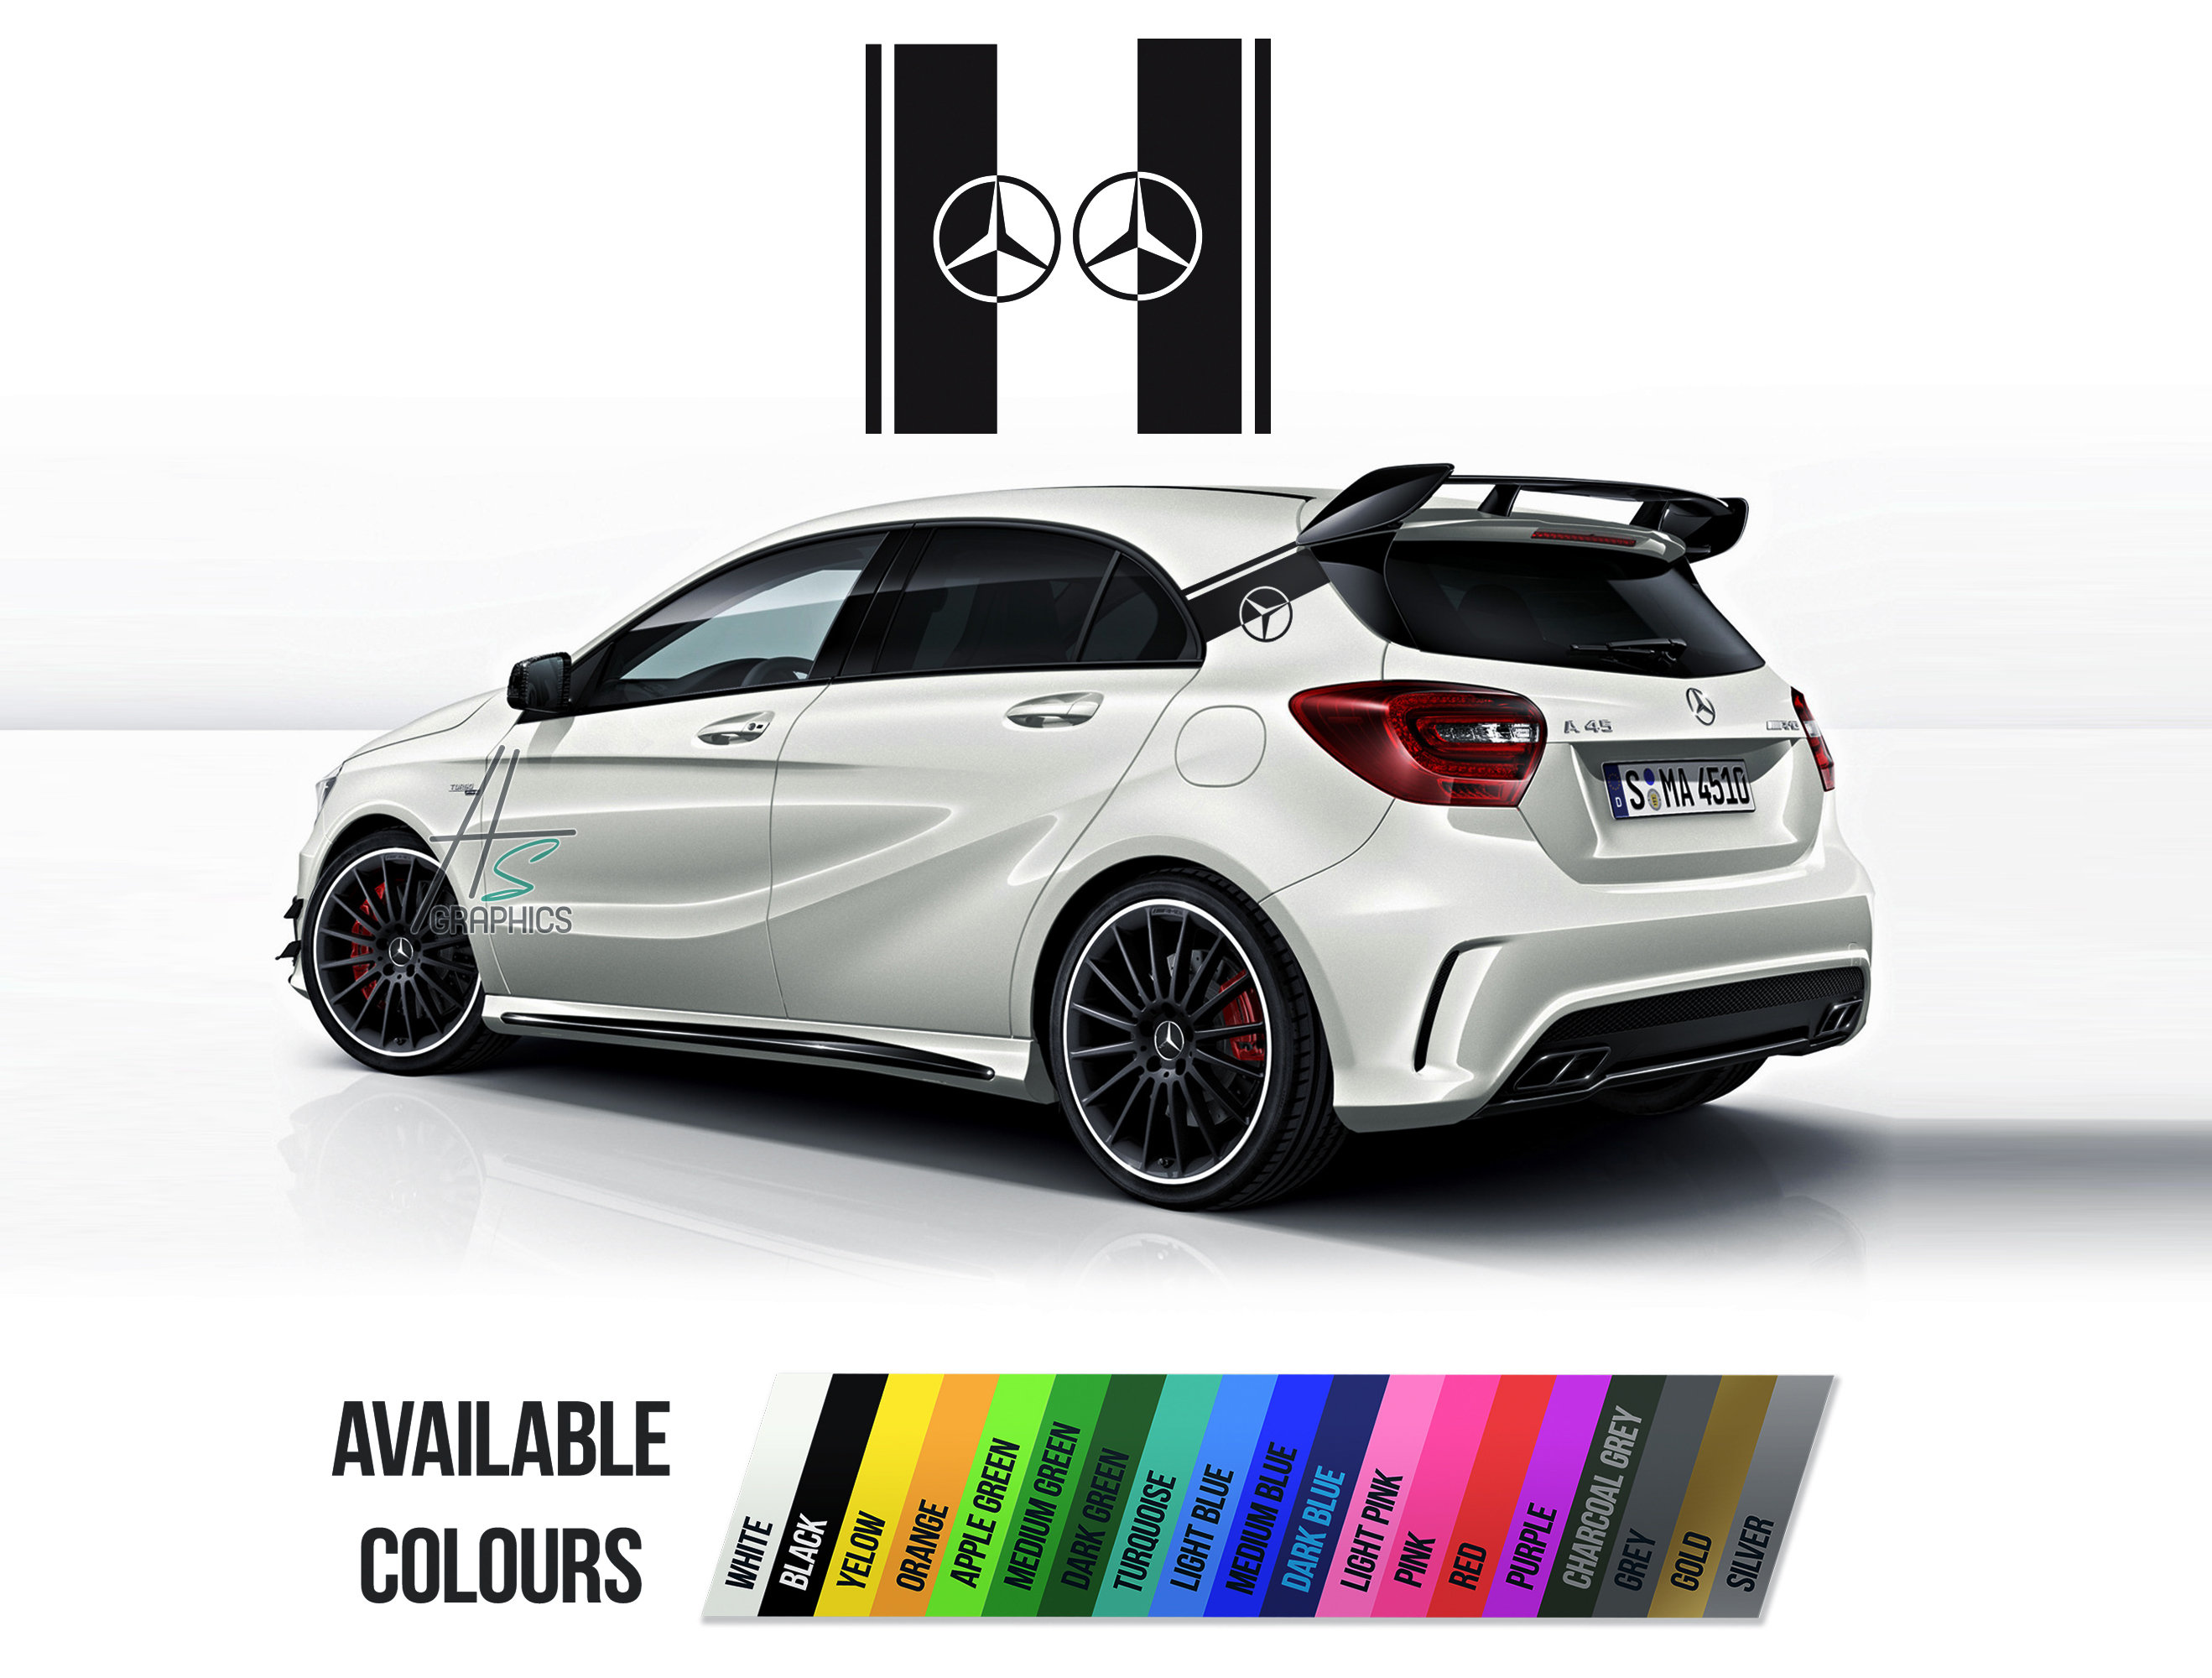 Buy Mercedes Decal Online In India -  India